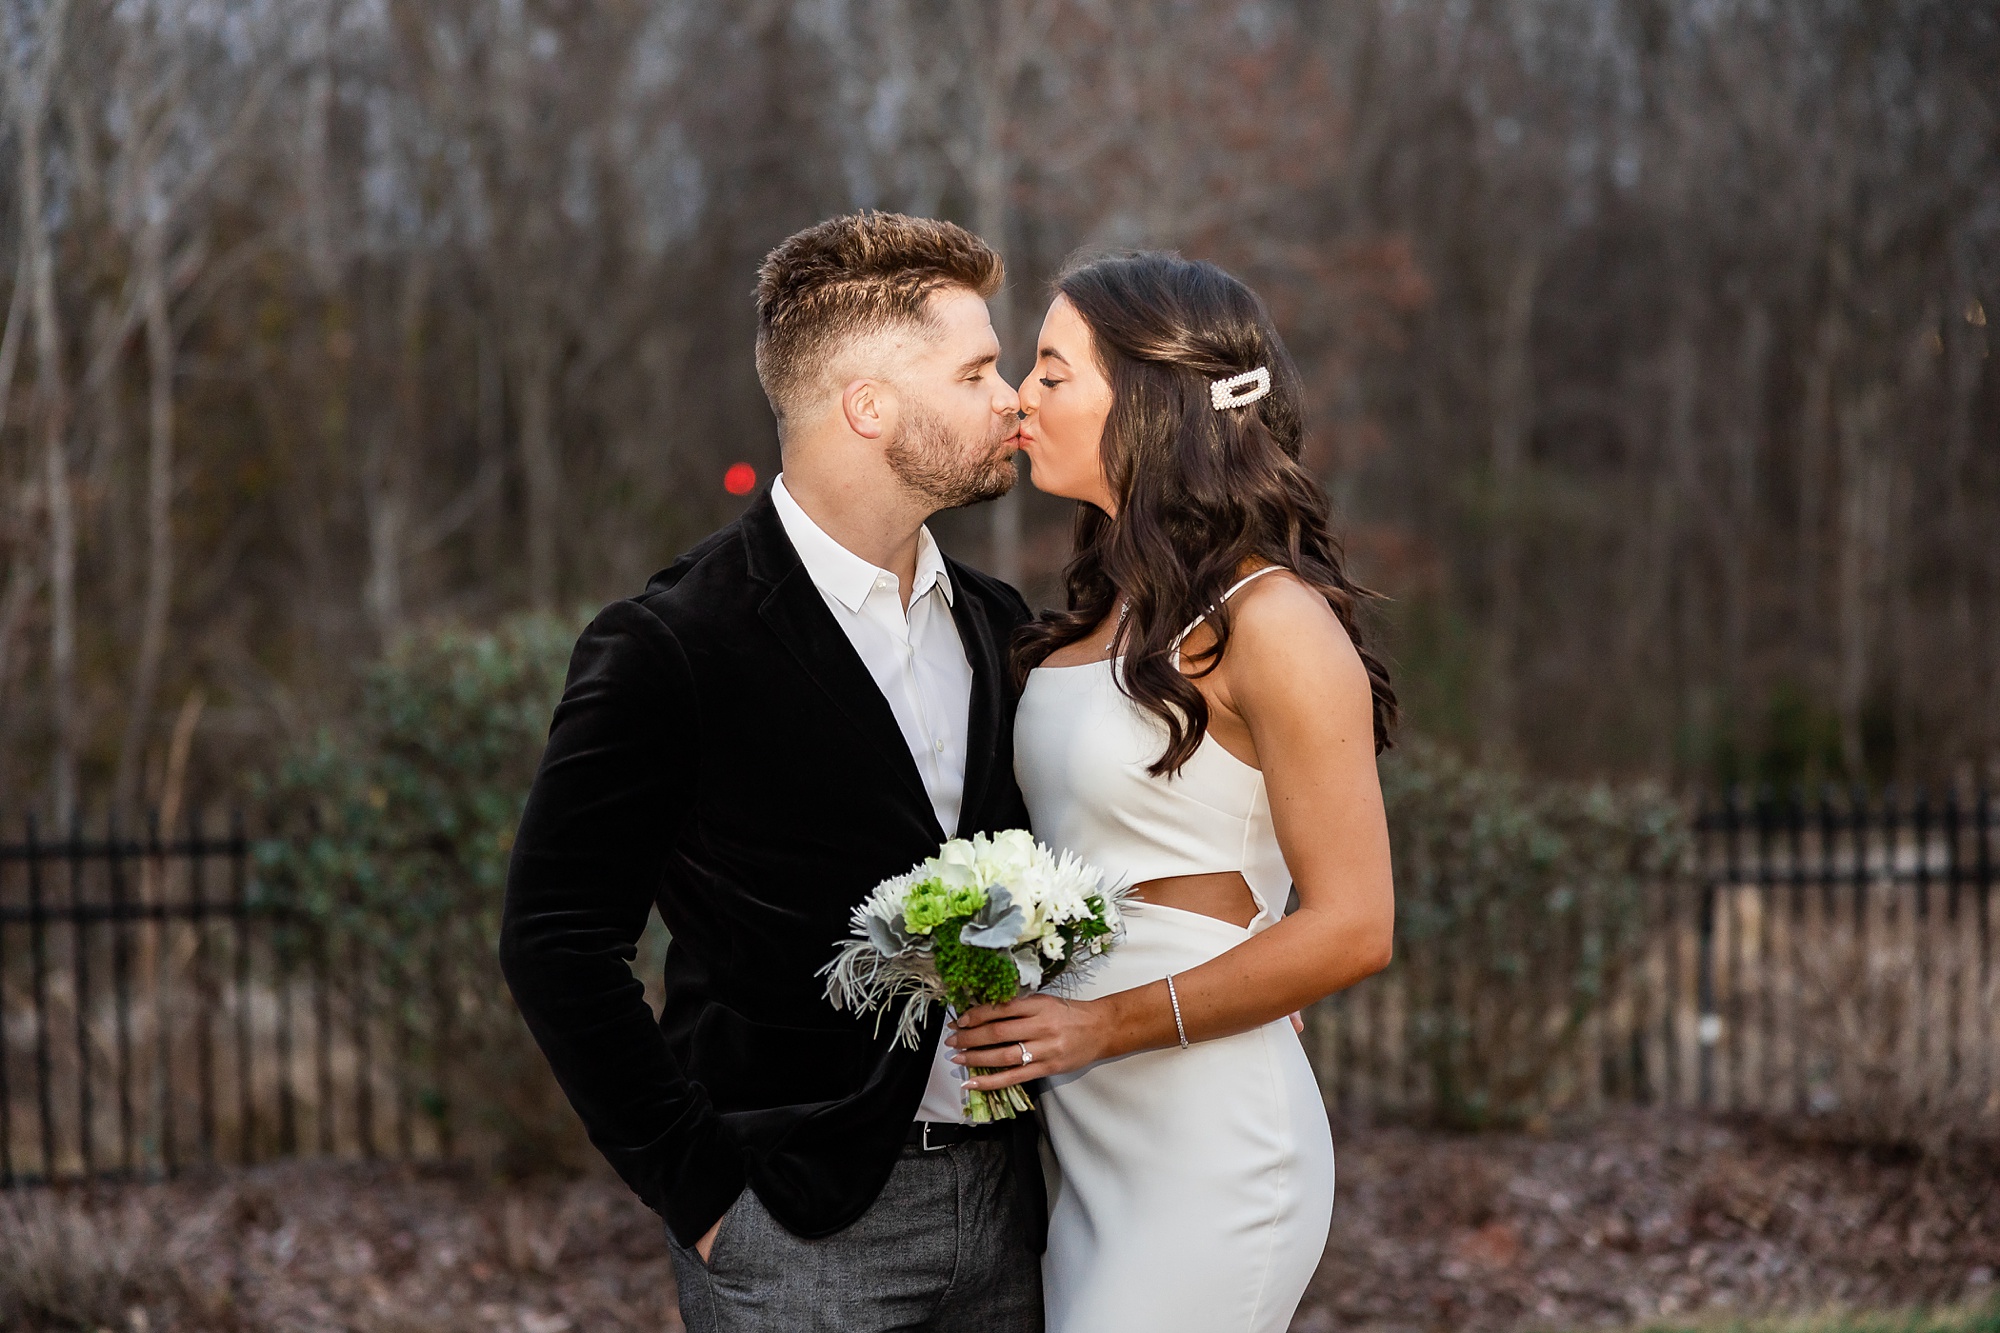 newlyweds kiss on patio during intimate at-home elopement